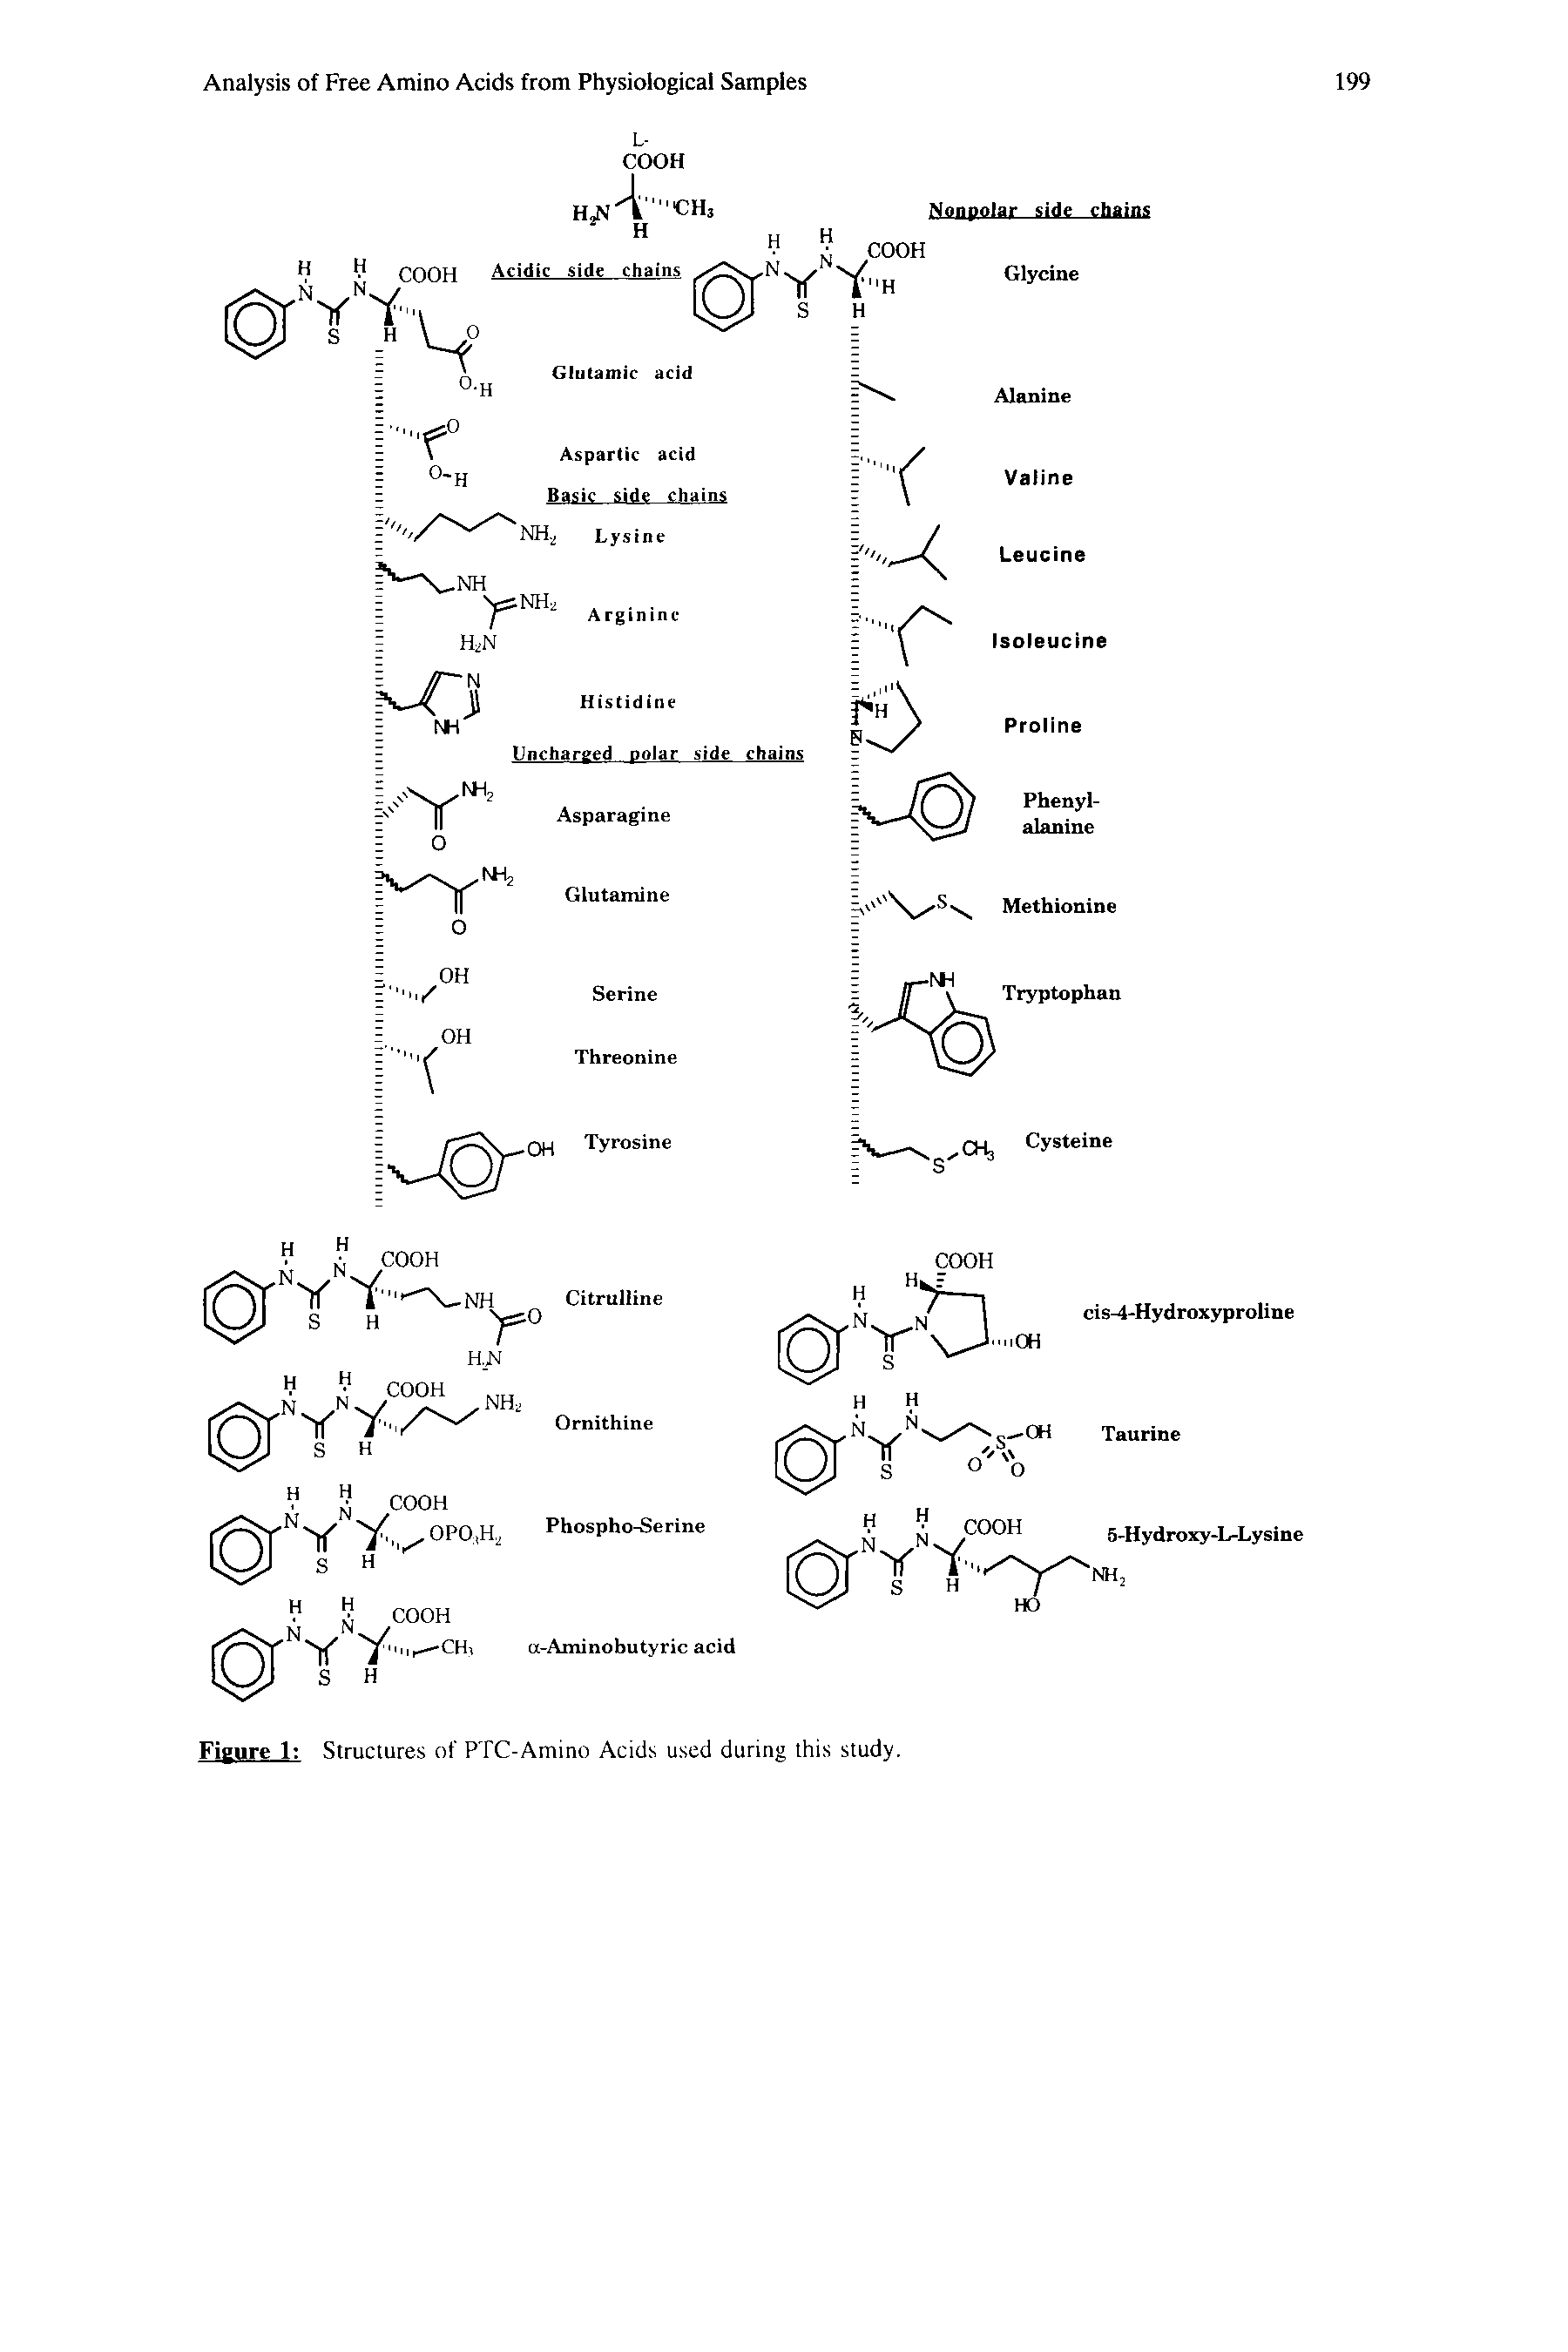 Figure 1 Structures of PTC-Amino Acids used during this study.